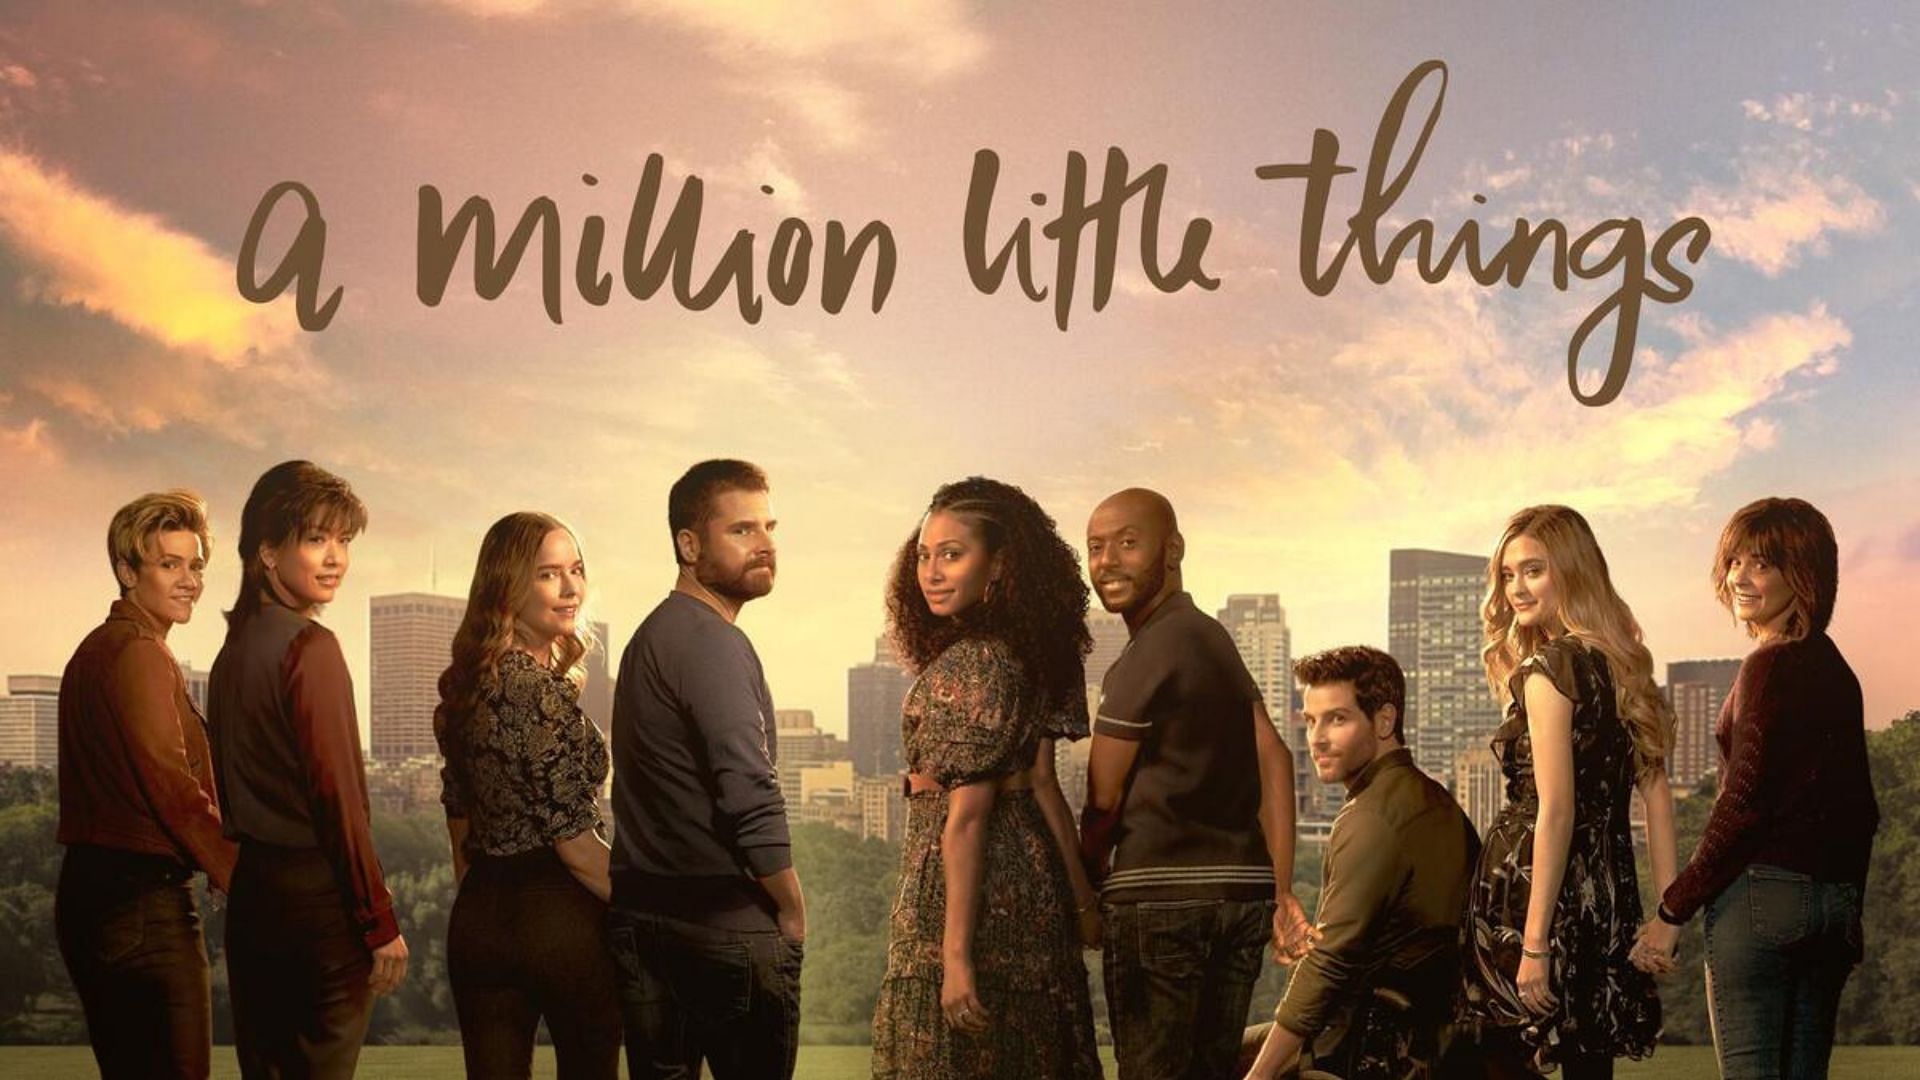 A Million Little Things promotional poster (Image via ABC)